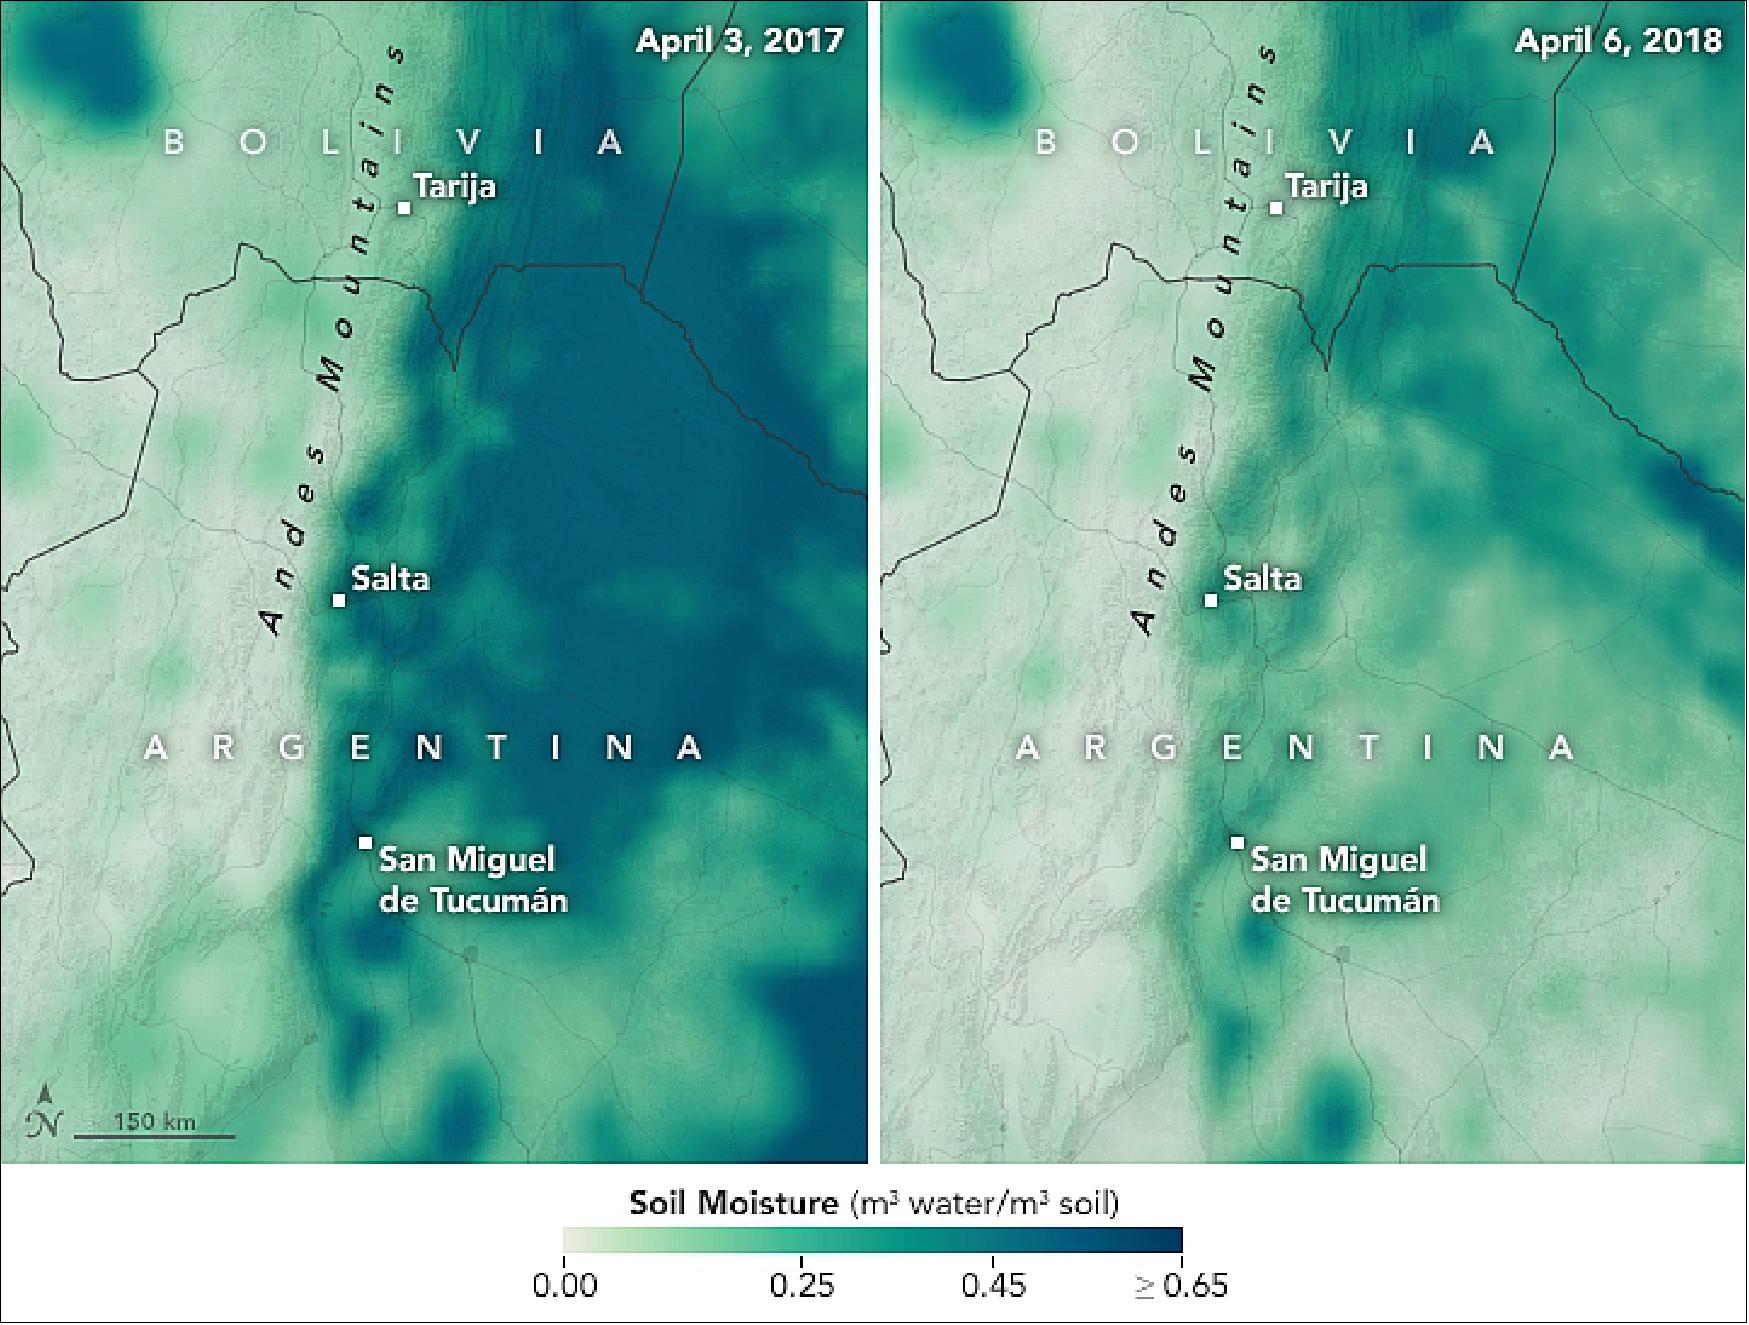 Figure 29: Soil moisture map comparison of Argentina acquired with SMAP on April 3, 2017 (left) and on April 6, 2018 (right), image credit: NASA Earth Observatory, images by Joshua Stevens, using soil moisture data courtesy of JPL and the SMAP Science Team